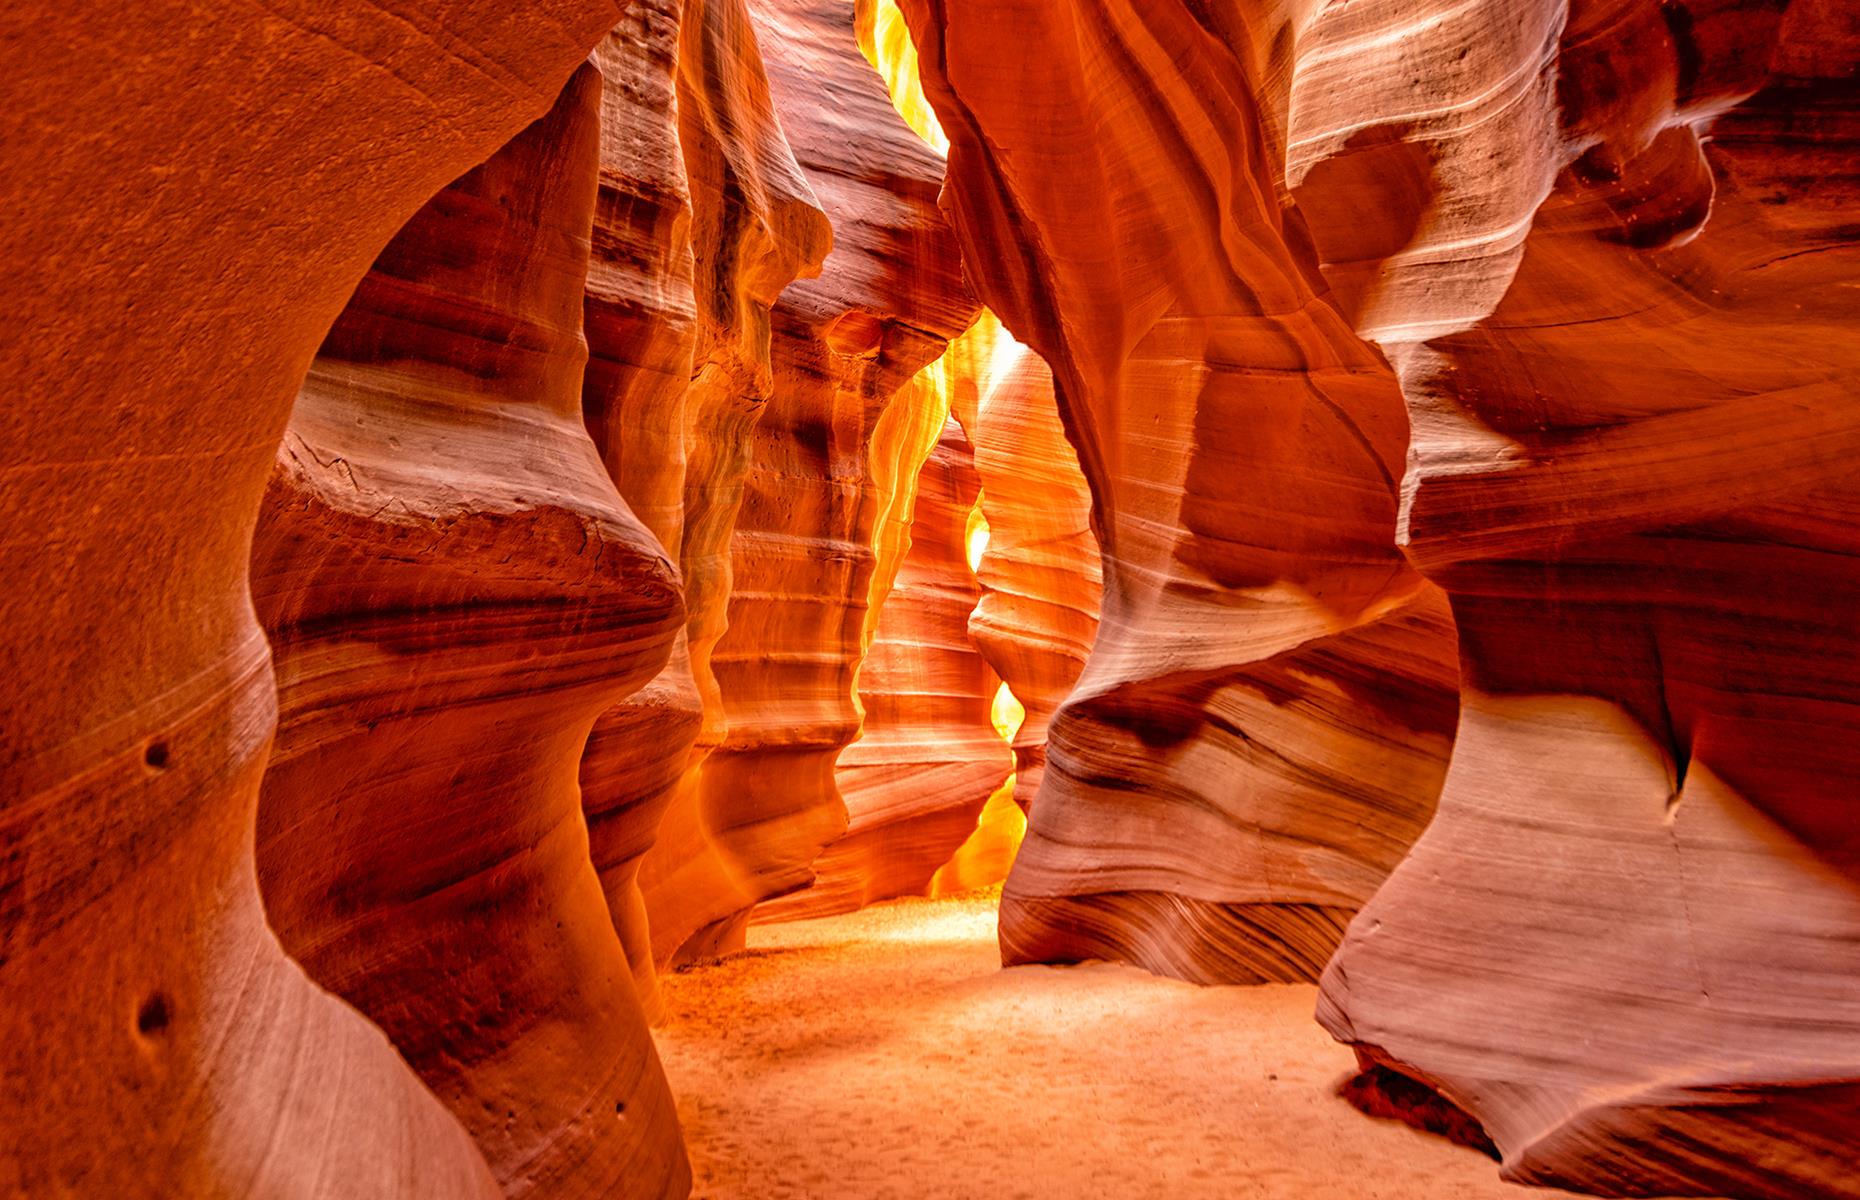 <p>The valleys of Antelope Canyon in Arizona were created over thousands of years by flash flooding, which eroded the sandstone pathways and shaped the distinctive curves you see today. What many don't know is that it's actually two separate slot canyons – Upper Antelope Canyon or The Crack and Lower Antelope Canyon or The Corkscrew. Take a look at <a href="https://www.loveexploring.com/galleries/92037/stunning-images-of-the-worlds-most-incredible-canyons?page=1">stunning images of the world's most incredible canyons</a>.</p>